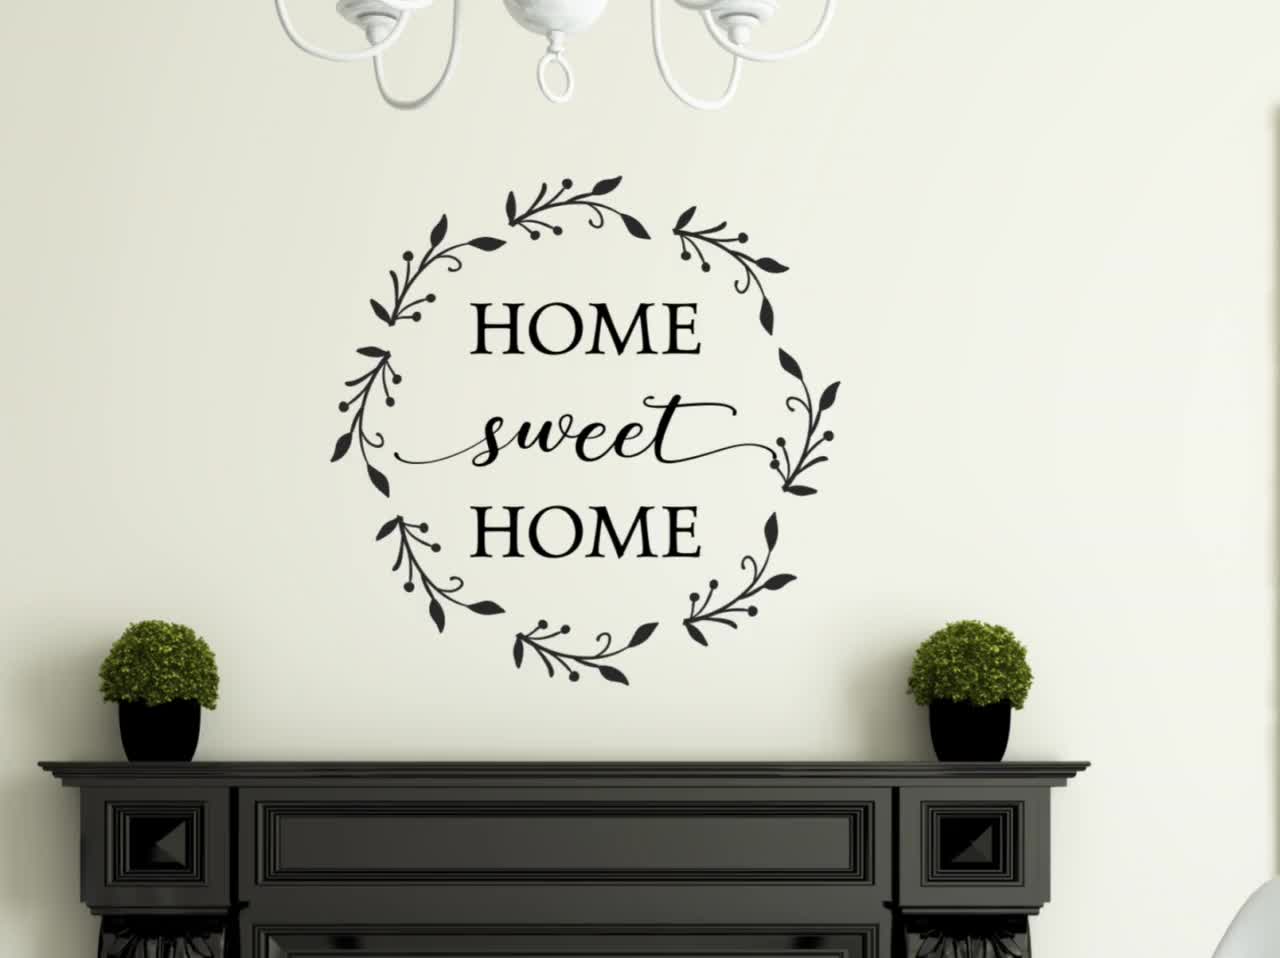 Family Makes a House a Home, Living Room Quotes, Family Wall Decal, Family  Decals, Family Decor, Family Wall Decor, Family Wall Decals 